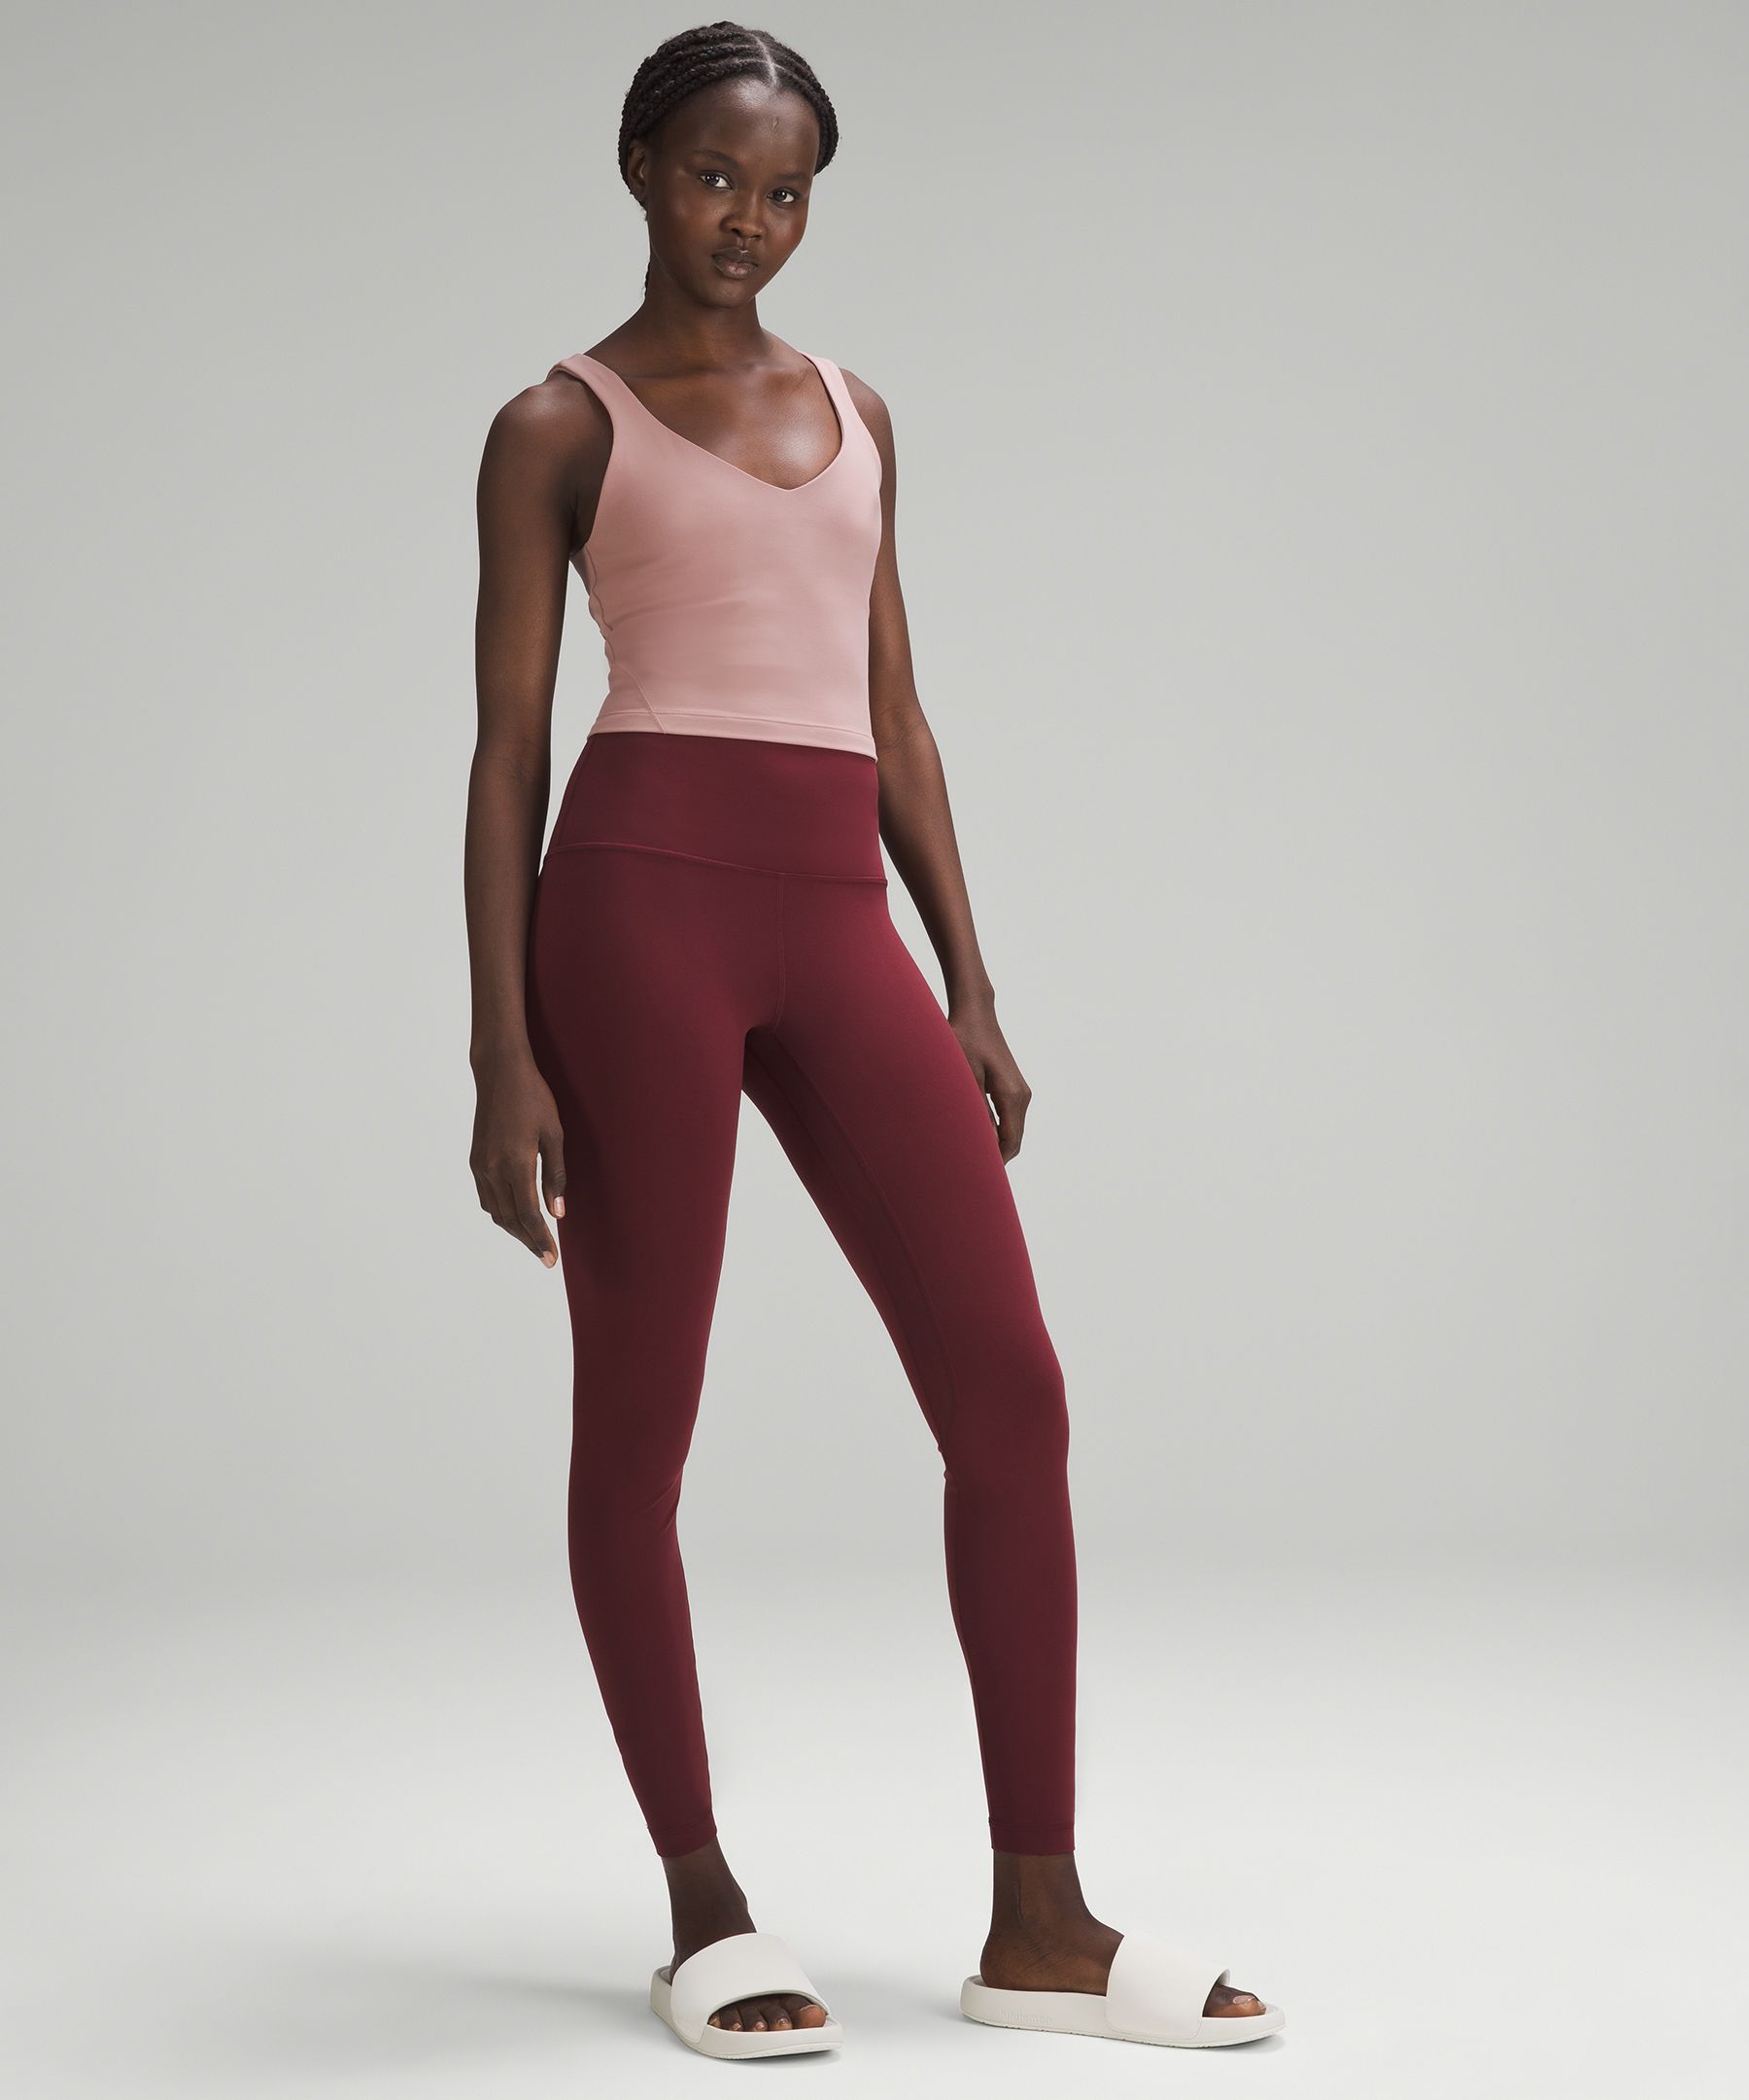 lululemon UK: Early access: We Made Too Much is back.